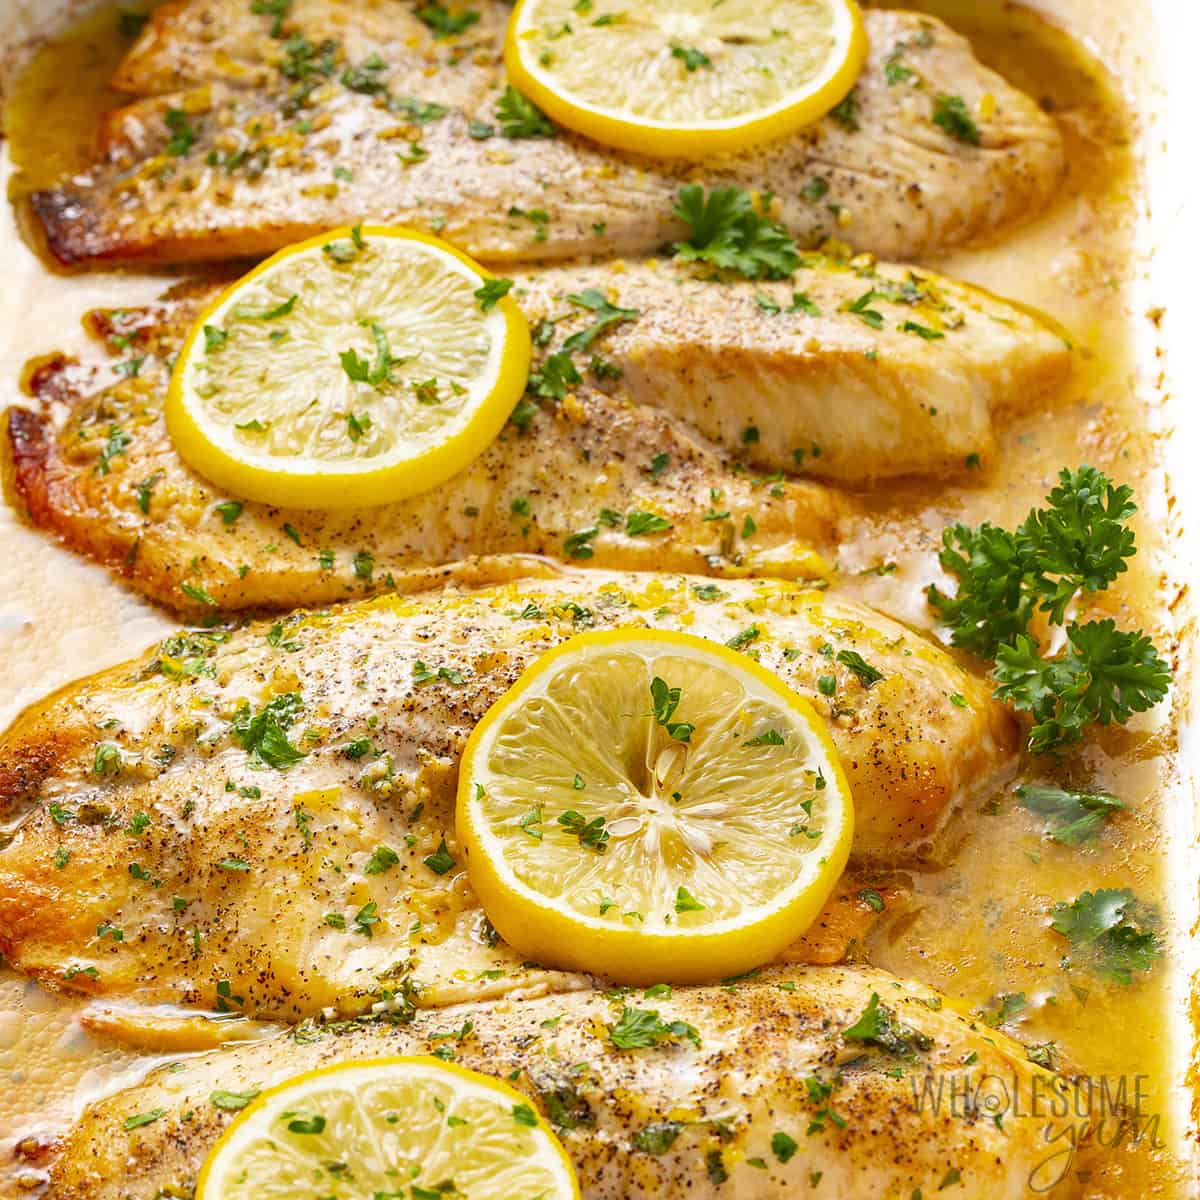 Oven baked tilapia in a baking dish garnished with parsley.